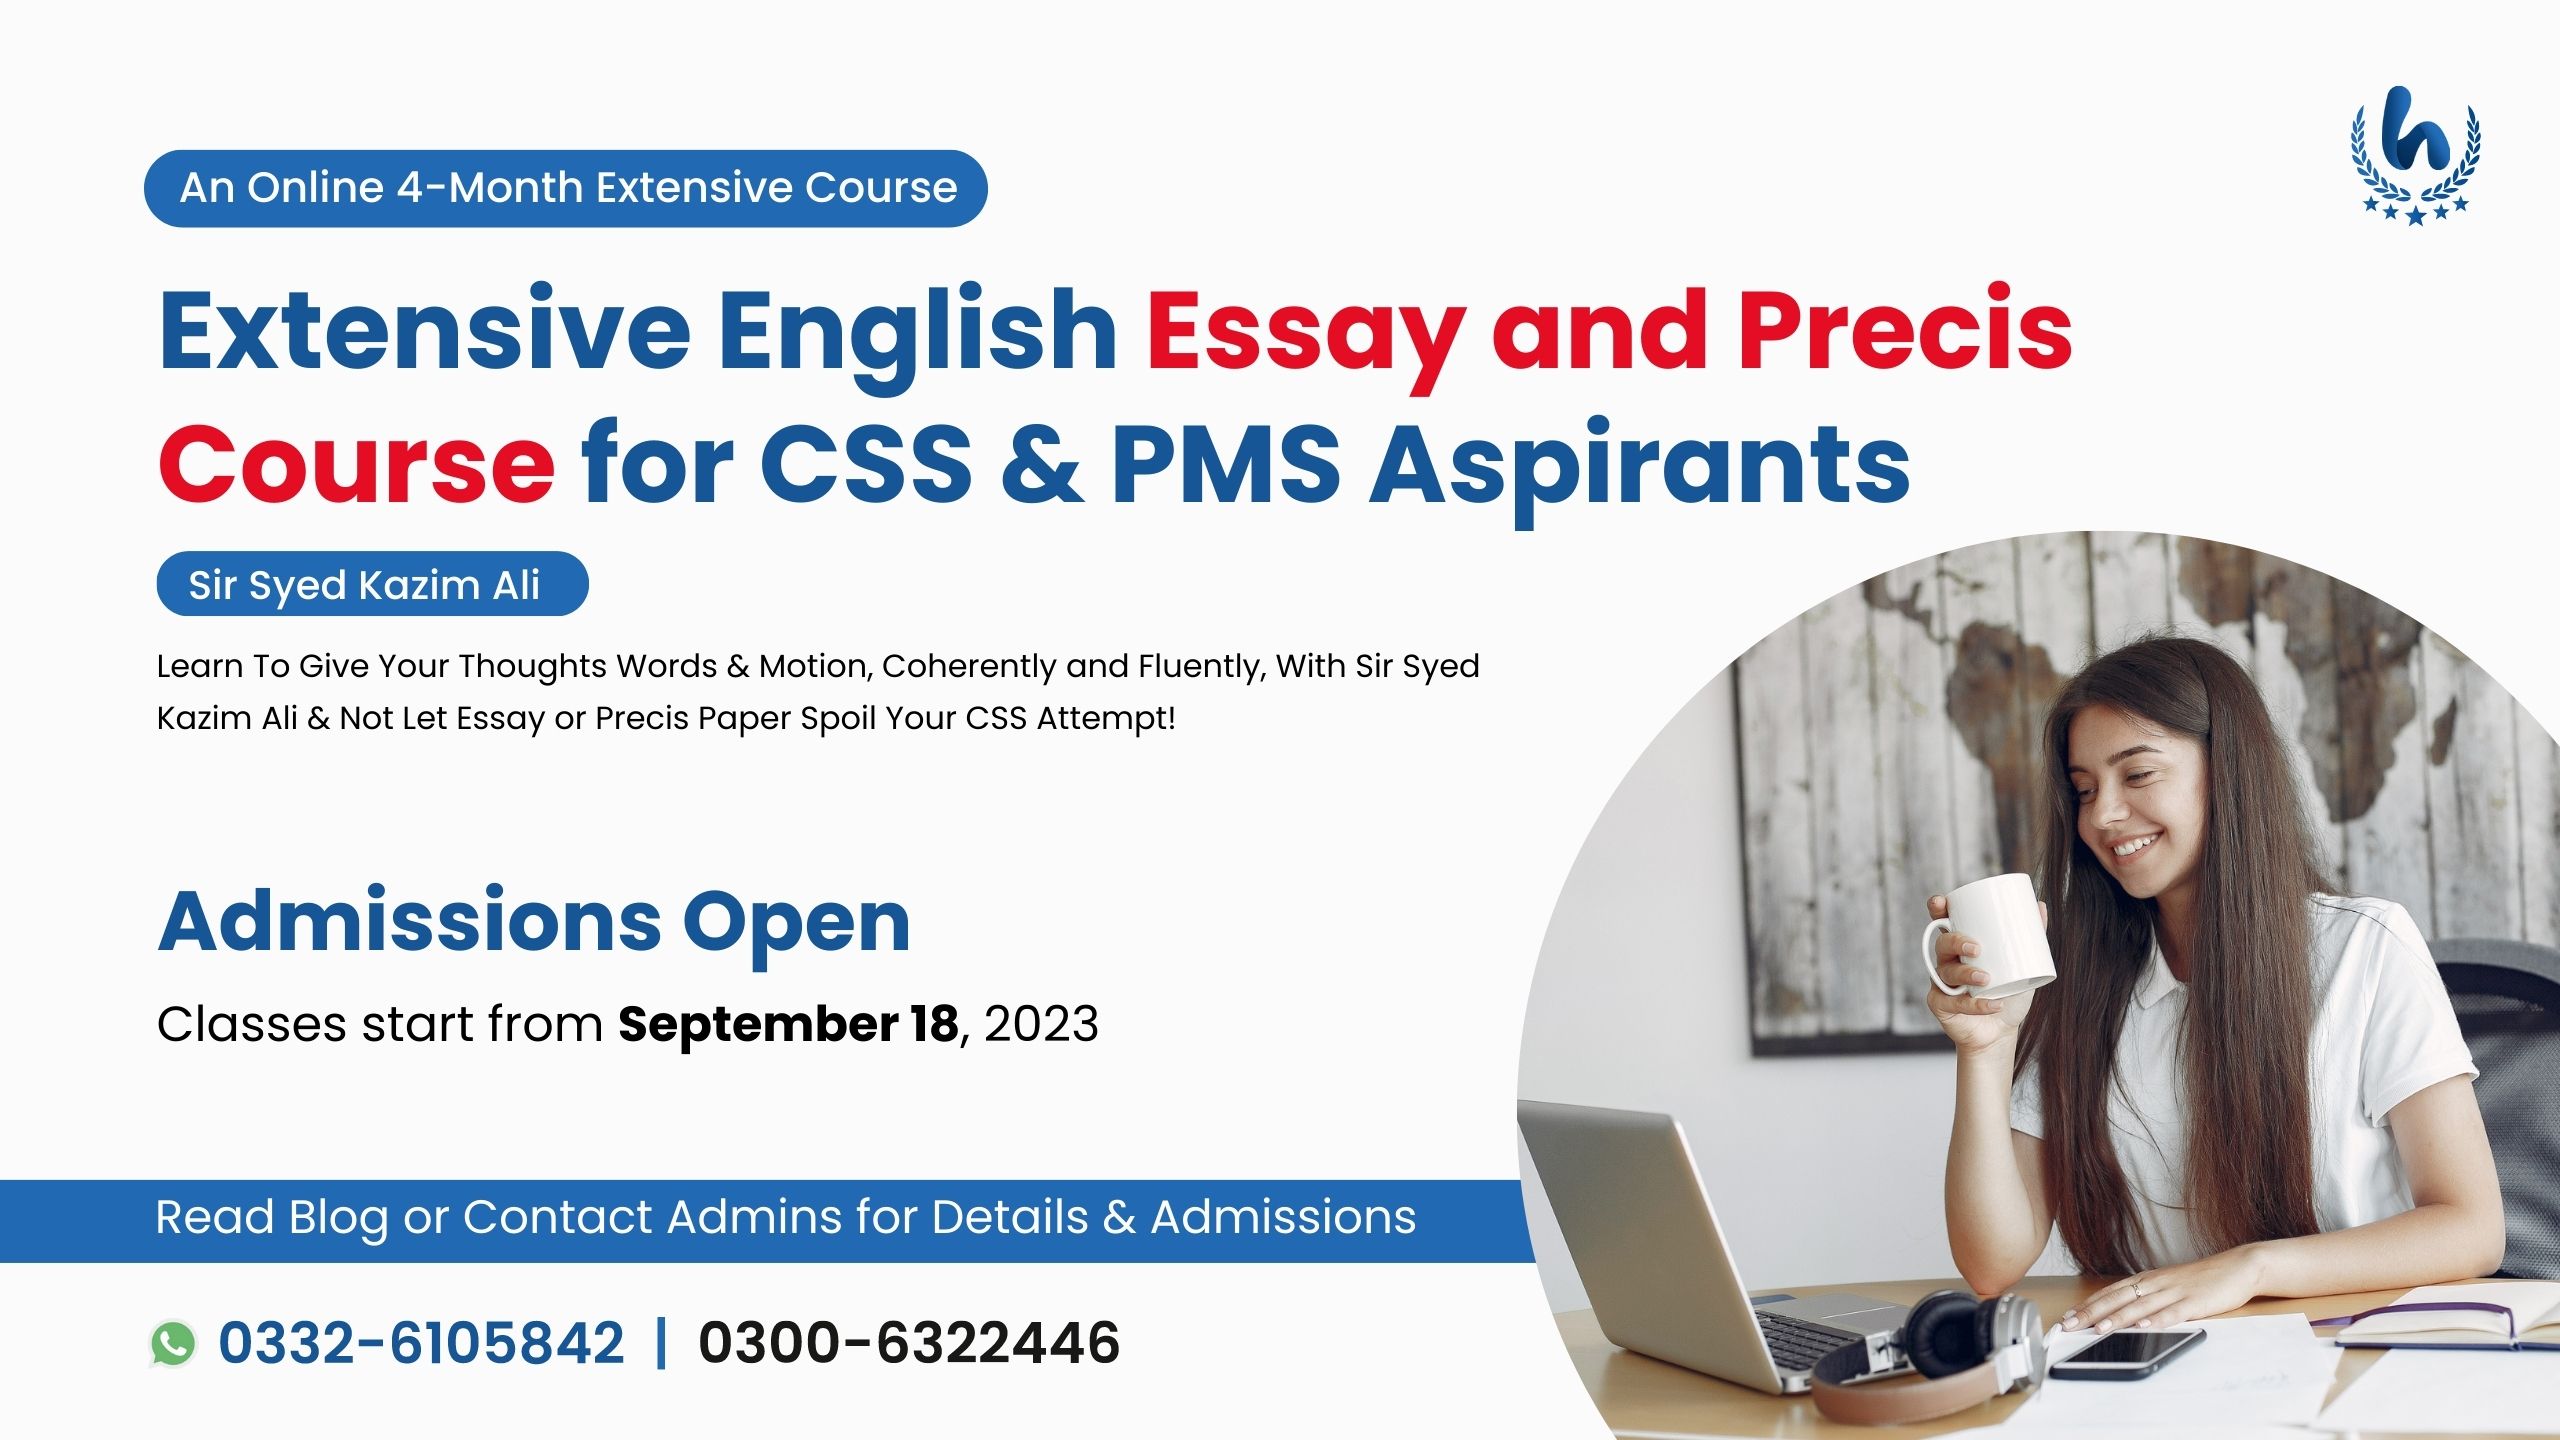 English Essay and Precis Course for CSS and PMS Aspirants